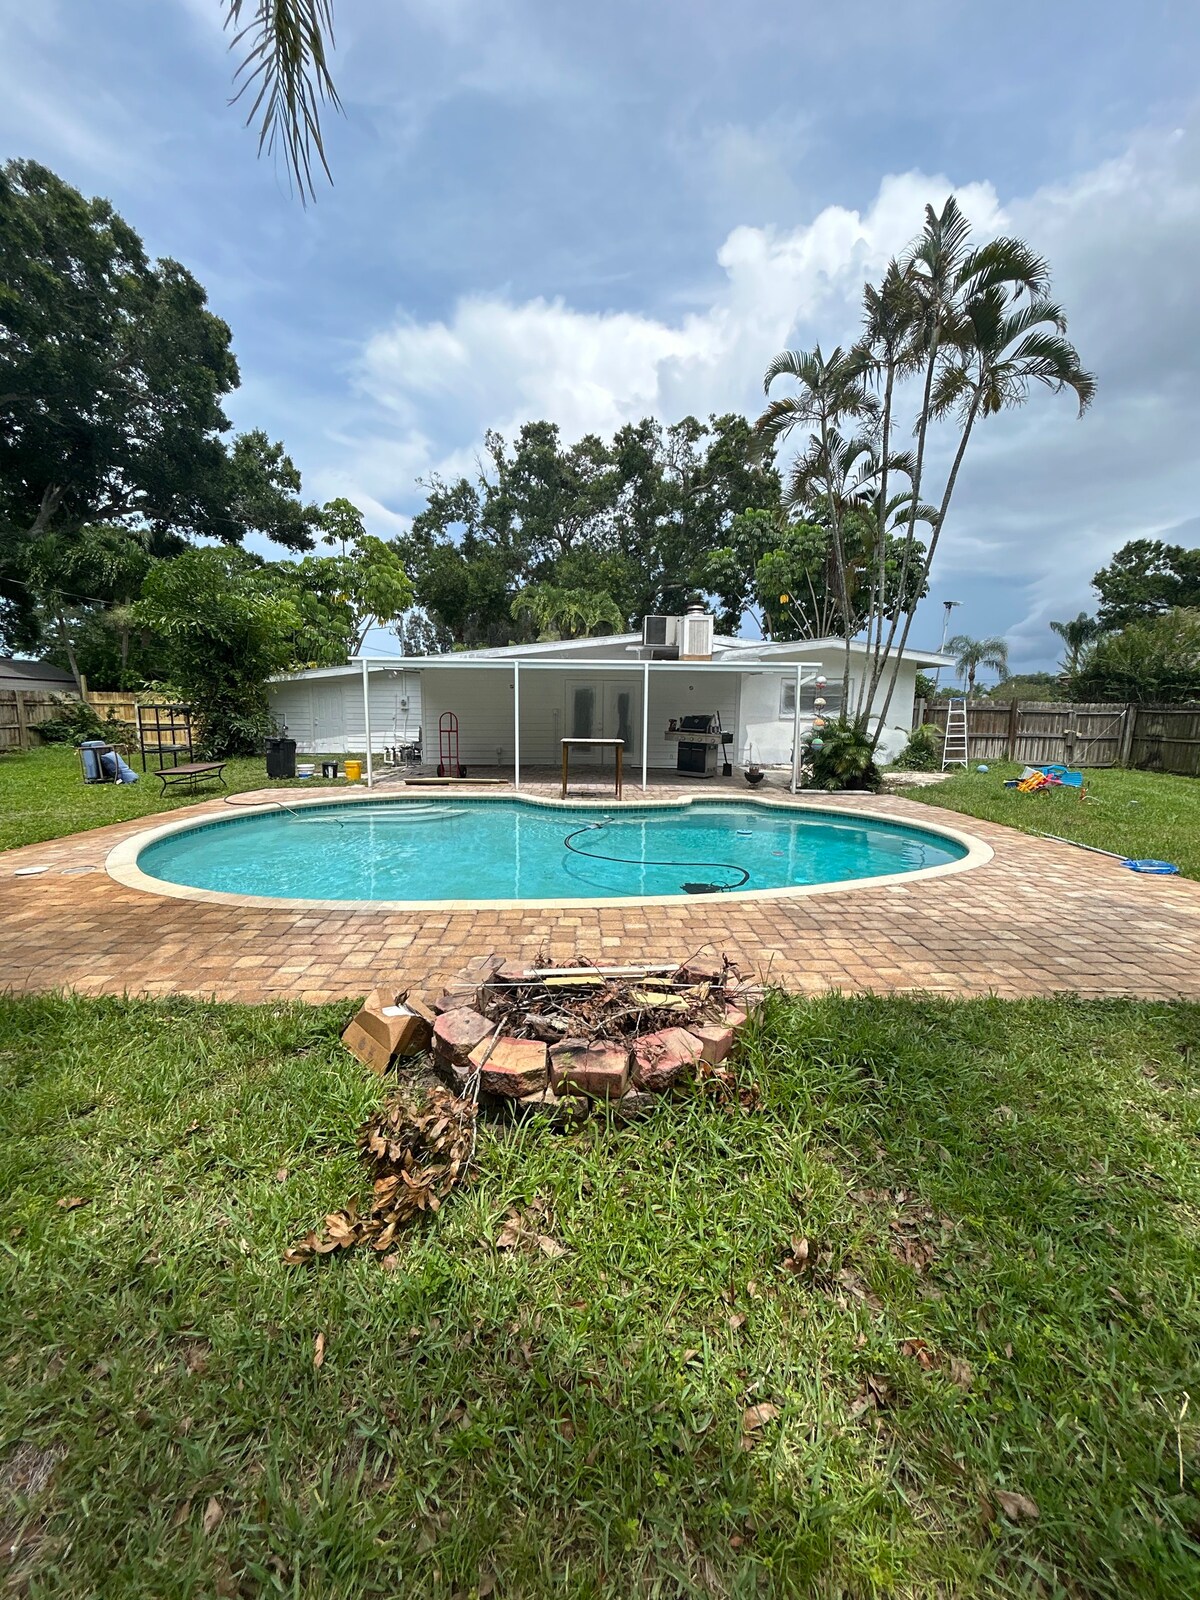 House with pool close to beach.